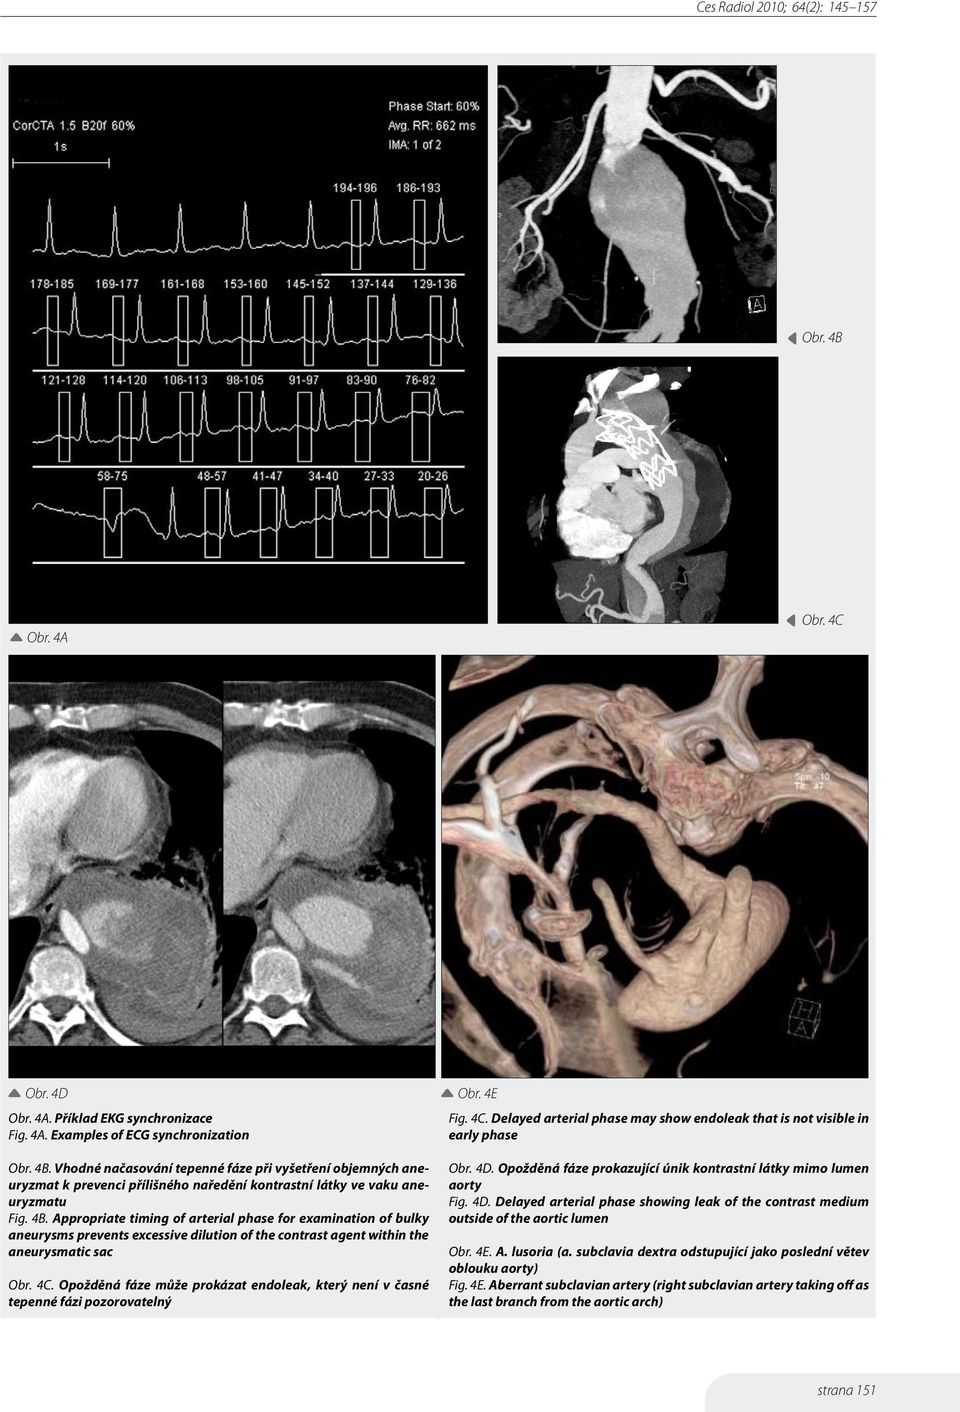 Appropriate timing of arterial phase for examination of bulky aneurysms prevents excessive dilution of the contrast agent within the aneurysmatic sac Obr. 4C.